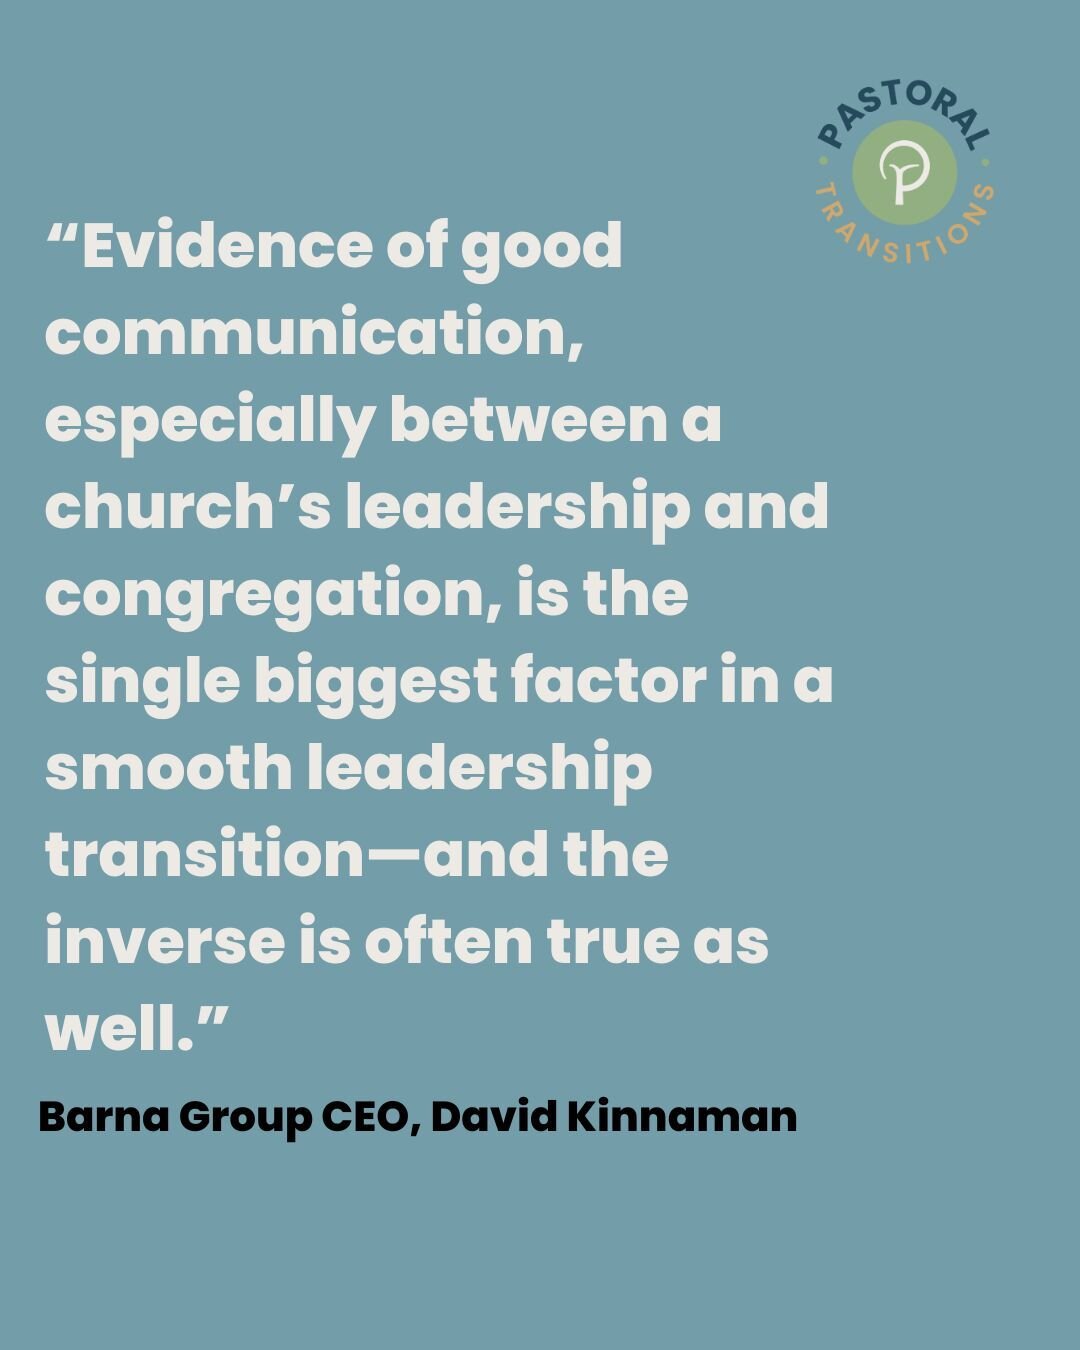 Taken directly from Barna's latest study: The State of Pastors:

In Barna&rsquo;s Leadership Transitions report (produced in partnership with Brotherhood Mutual), we found that a successful pastoral transition depends on multiple factors like transpa